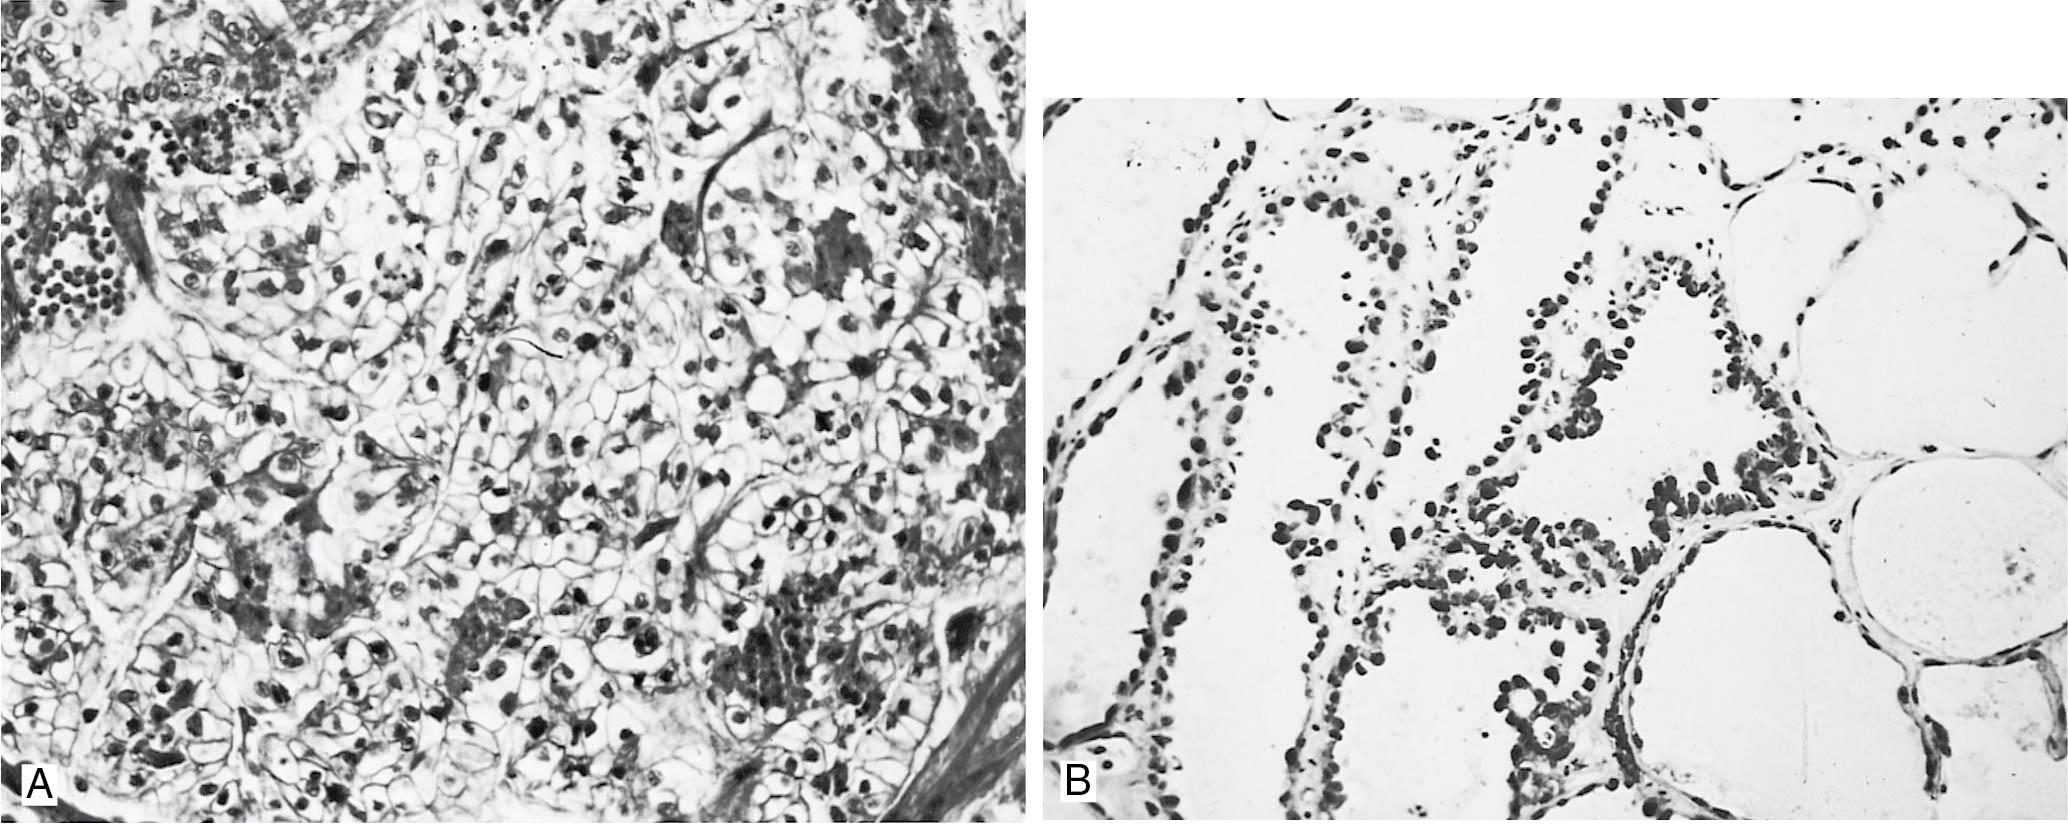 Fig. 33.5, A, Clear cell adenocarcinoma (original magnification ×200). A solid pattern of abundant polyhedral tumor cells containing abundant clear cytoplasm is present. B, Clear cell adenocarcinoma (original magnification ×200). Left: Hobnail cells with scant cytoplasm; protruding nuclei line shows tubules . Right: Cysts lined by flattened tumor cells.